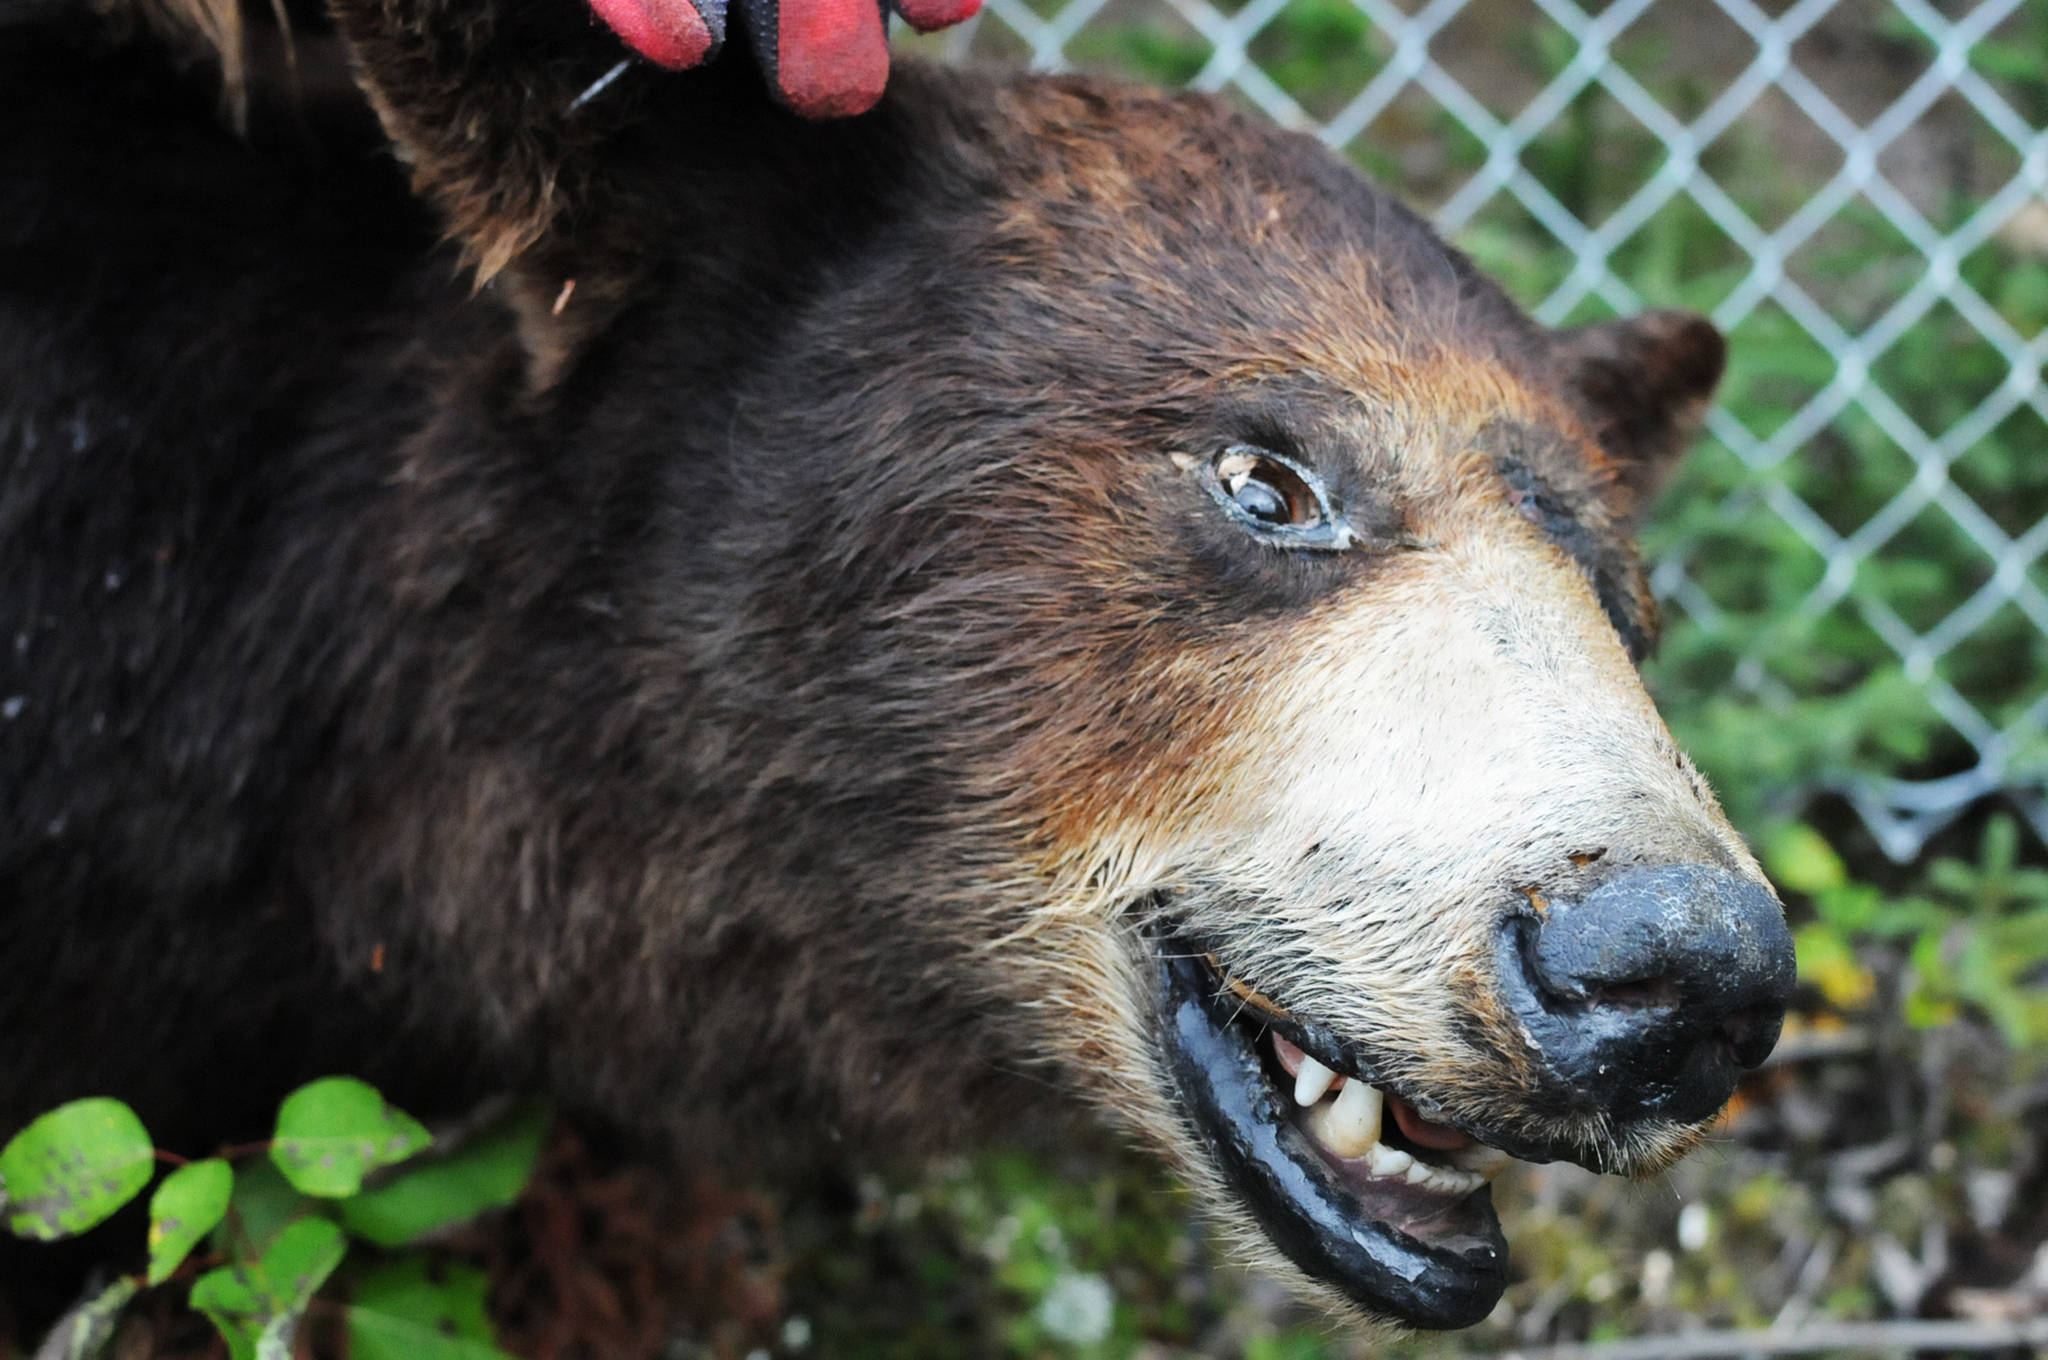 A taxidermied brown bear keeps an eye on visitors entering the Sterling Transfer Site on Saturday, Sept. 16, 2017 near Sterling, Alaska. The attendants at the transfer site, where trash is picked up and taken to Central Peninsula Landfill, rescue stuffed animals from the trash and giving them new life in the “Sterling Zoo,” where they rest in the bushes and trees surrouding the transfer site to greet visitors throughout the summer. They go into “hibernation” in the winter, resting on a shelf to stay dry before reappearing the following summer. (Photo by Elizabeth Earl/Peninsula Clarion)